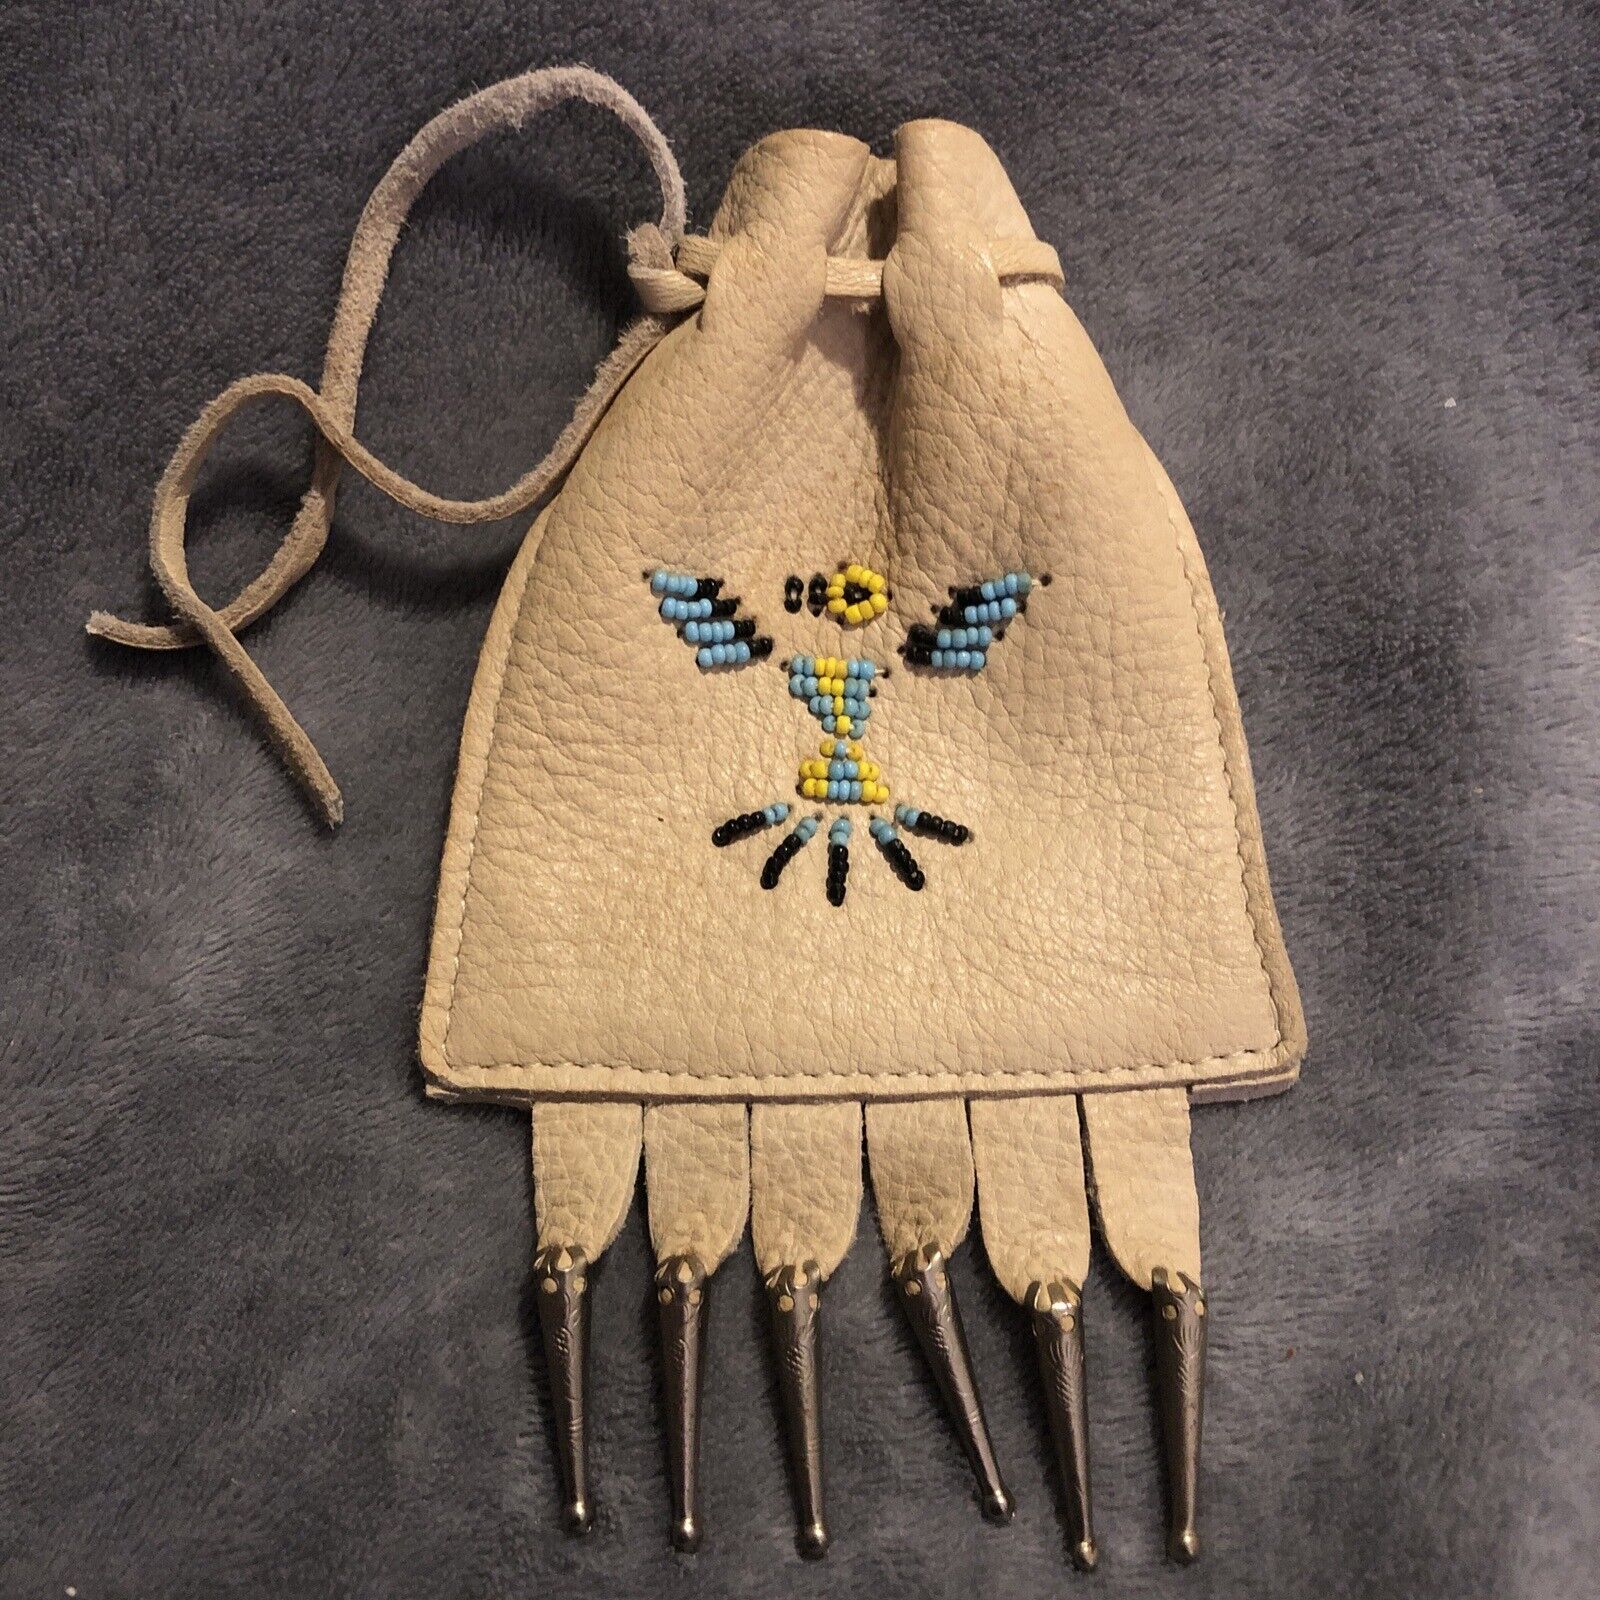 Leather Beaded Medicine Pouch (Was used to hide $\'s & valuables when traveling)